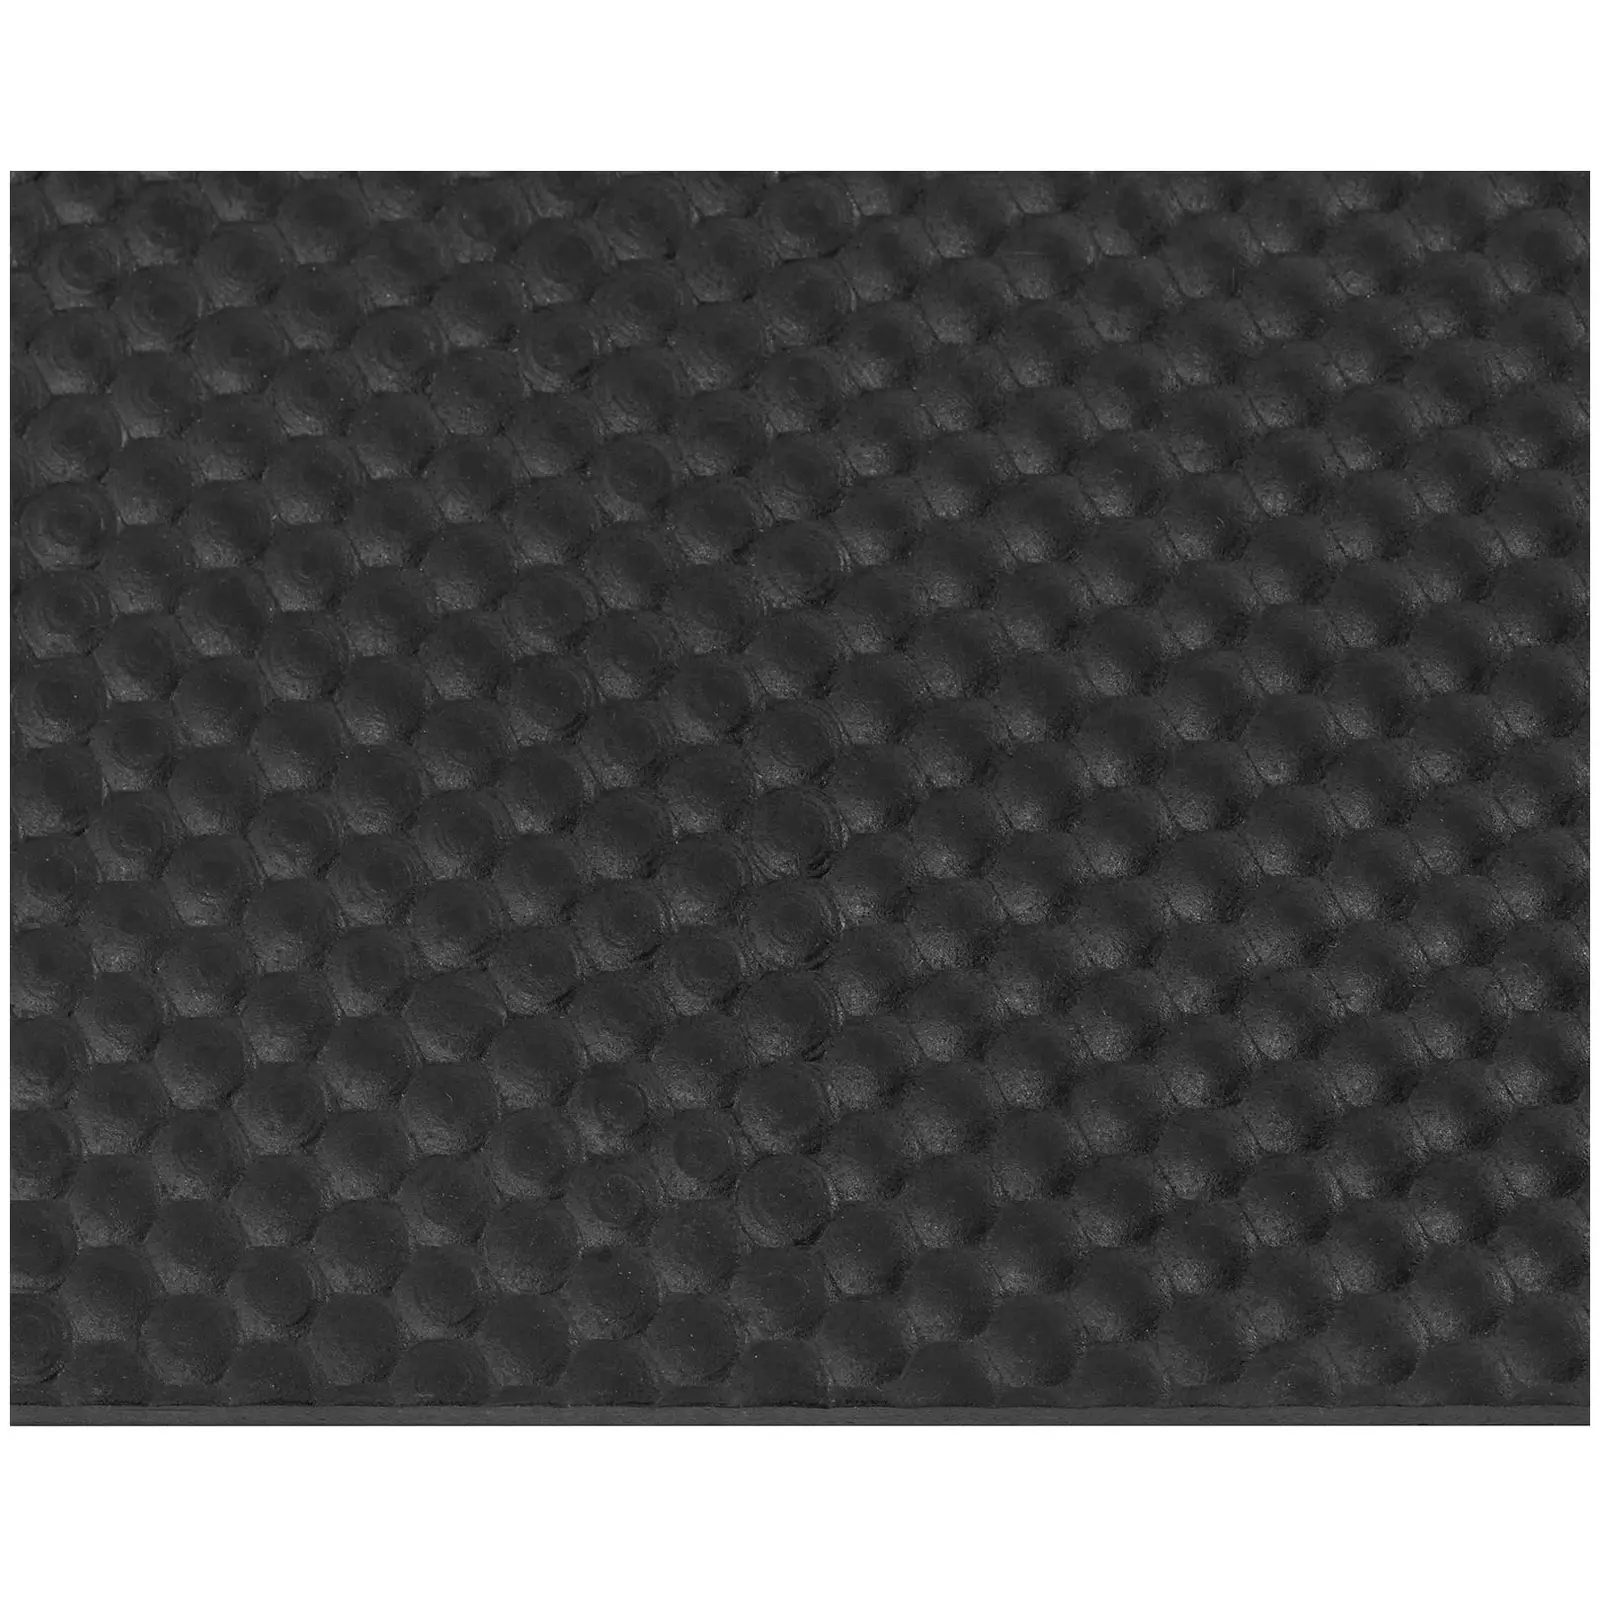 Stable Mats - set of 15 - with drainage studs - 1830 x 1220   mm - 33.45 m²